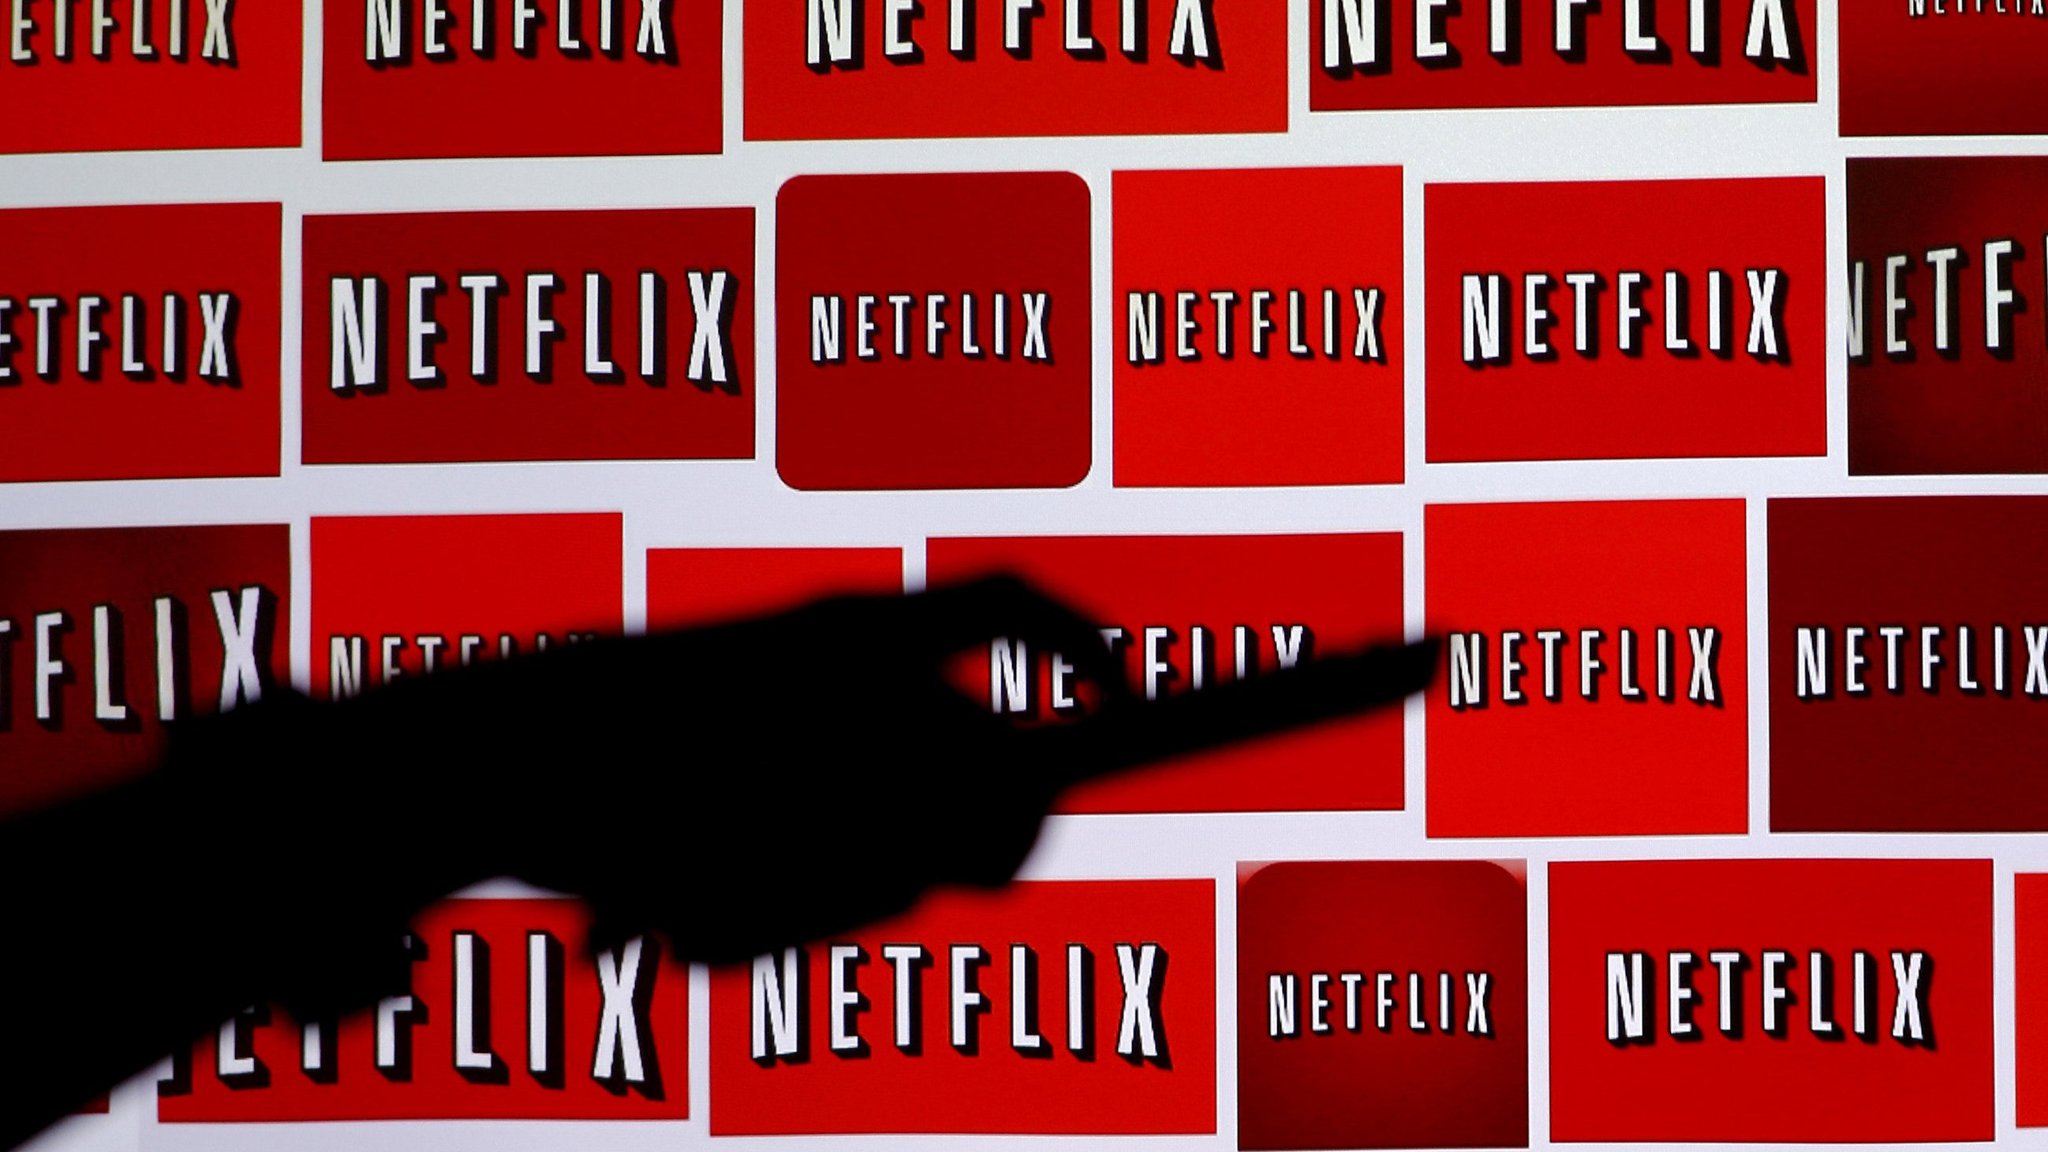 Netflix boosted original content output by 54.6 percent in 2019